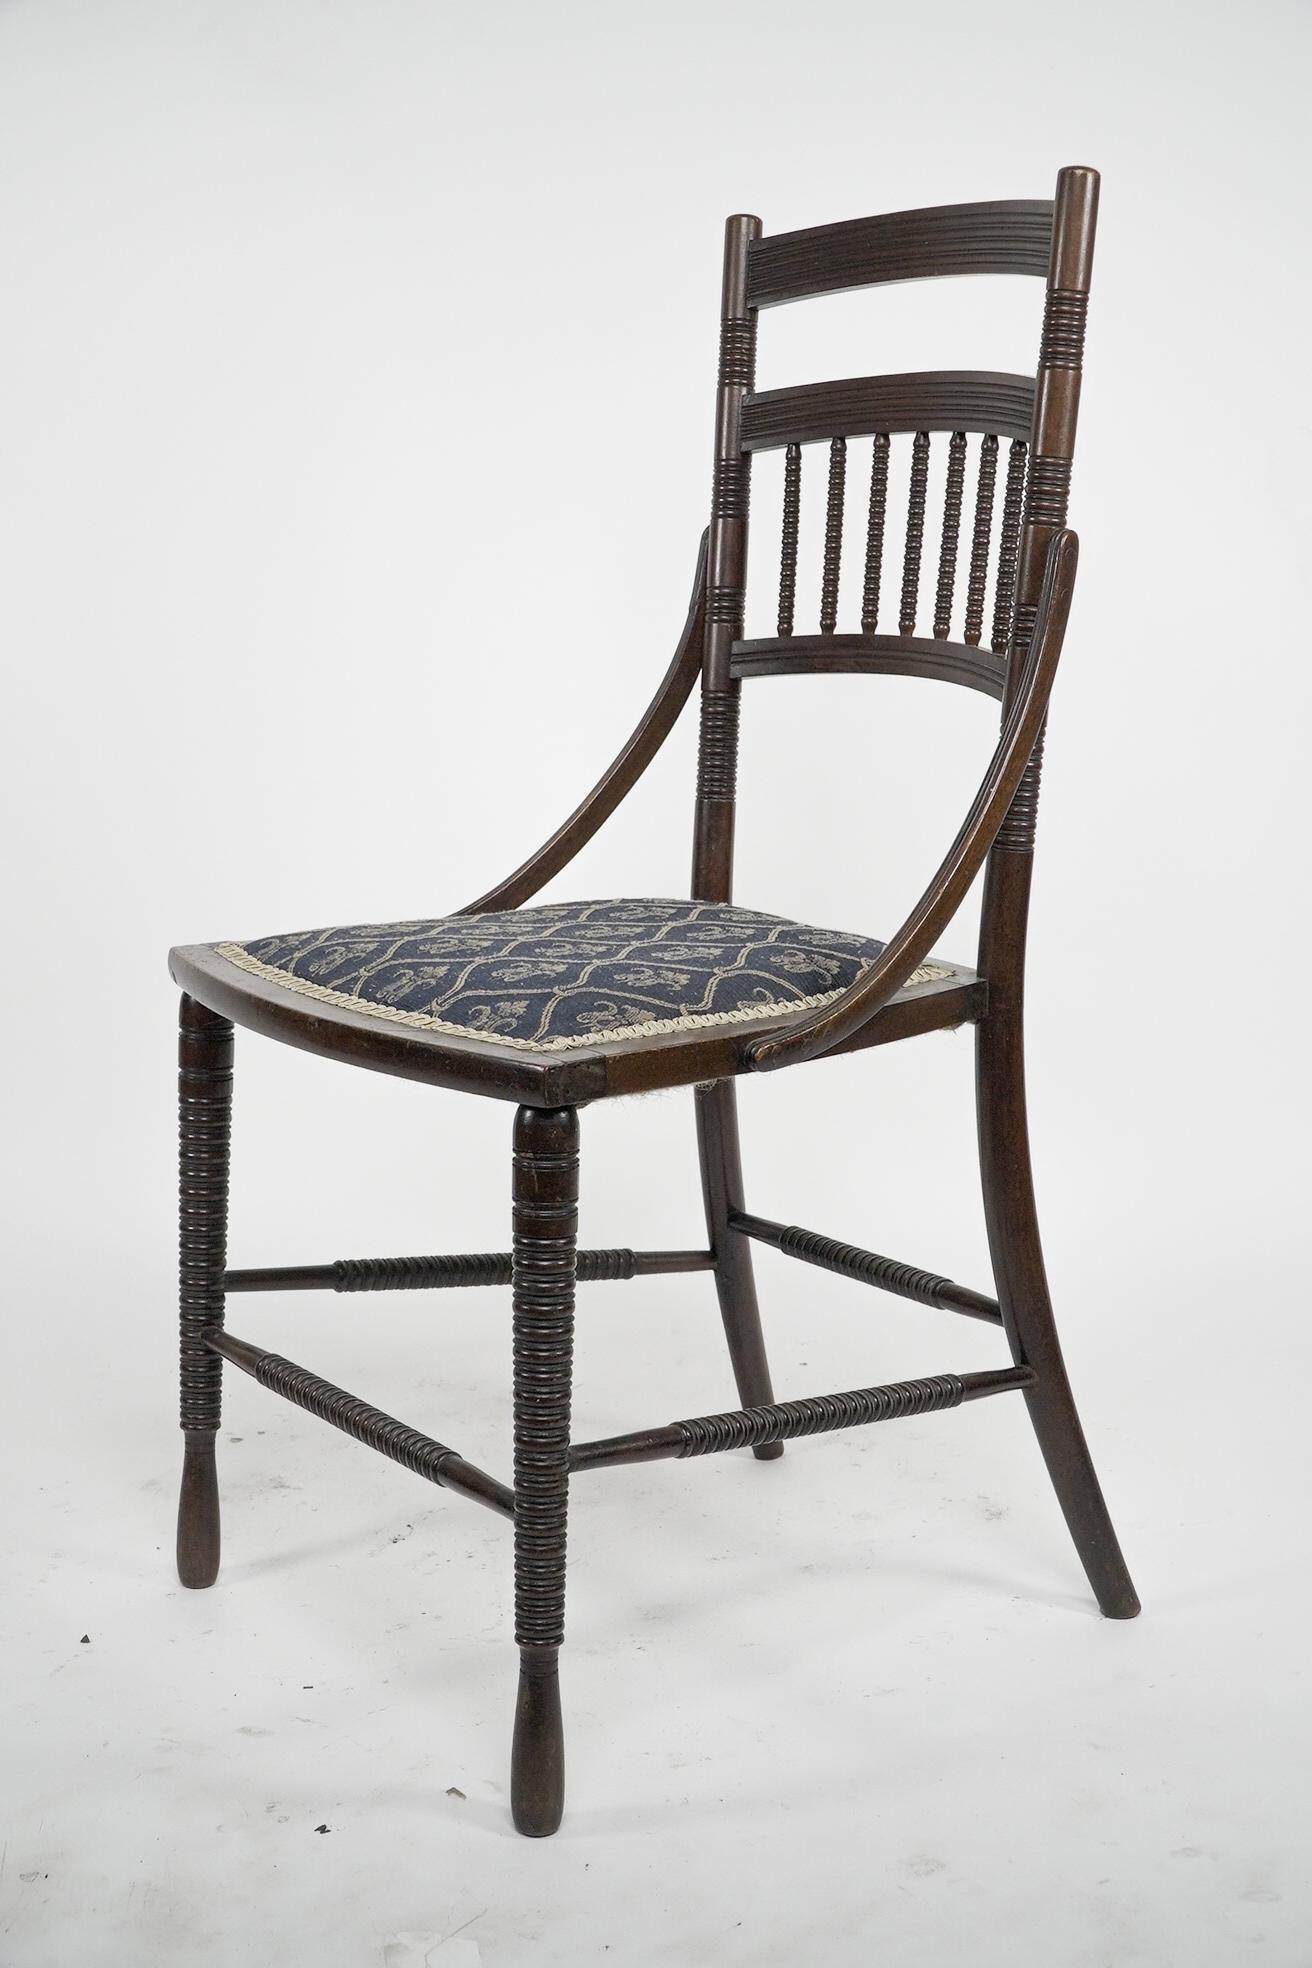 R. W. Edis, probably made by Jackson & Graham A fine pair of Walnut side chairs For Sale 3